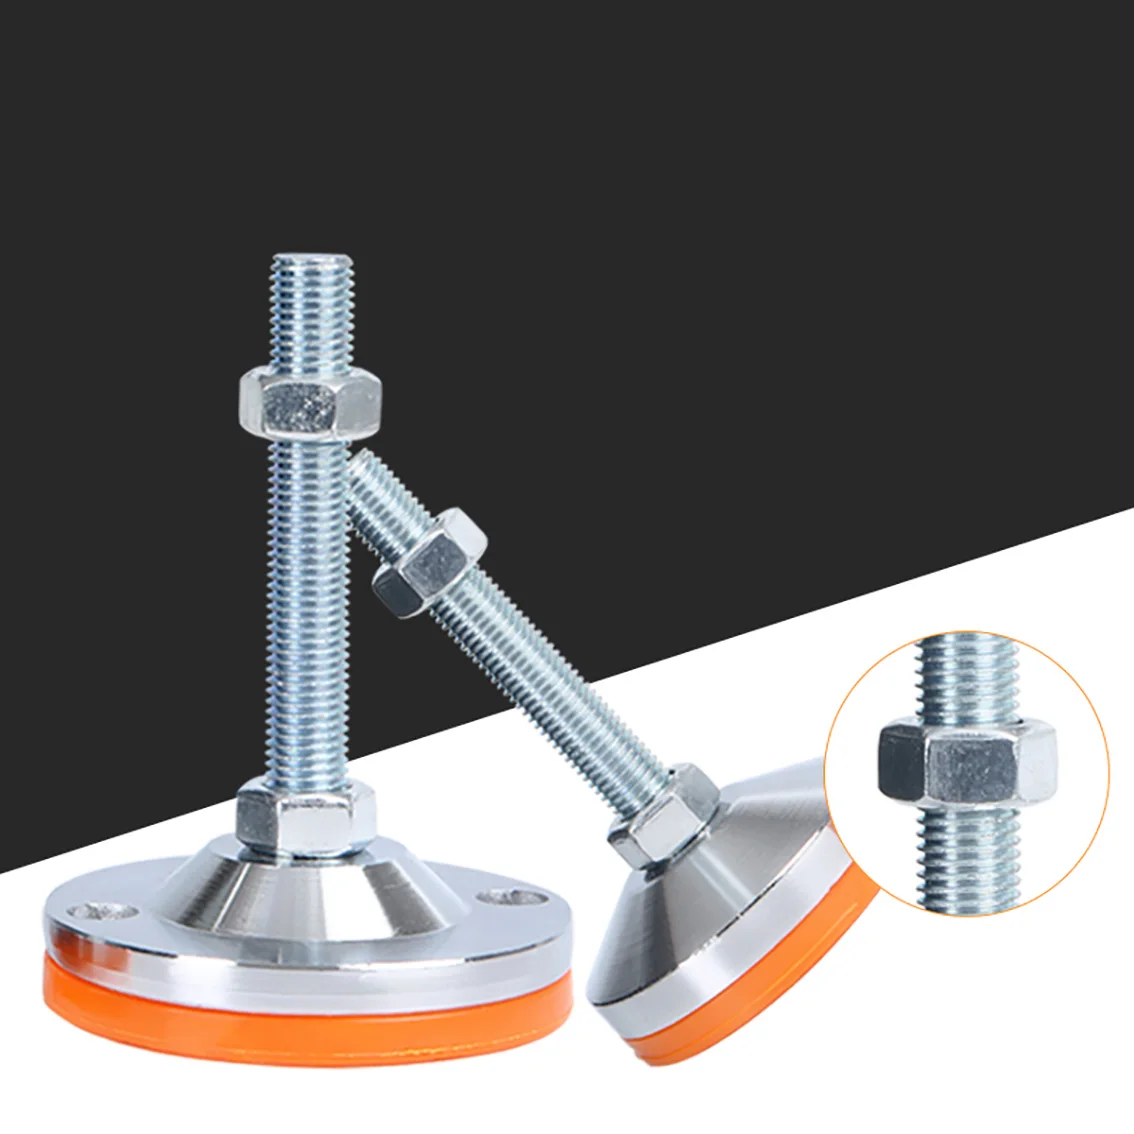 

1Pcs M12-M30 Metal Chassis Thread Length Articulated Leveling Foot Heavy-Duty Adjustment Foot Cup Non-Skid Pad